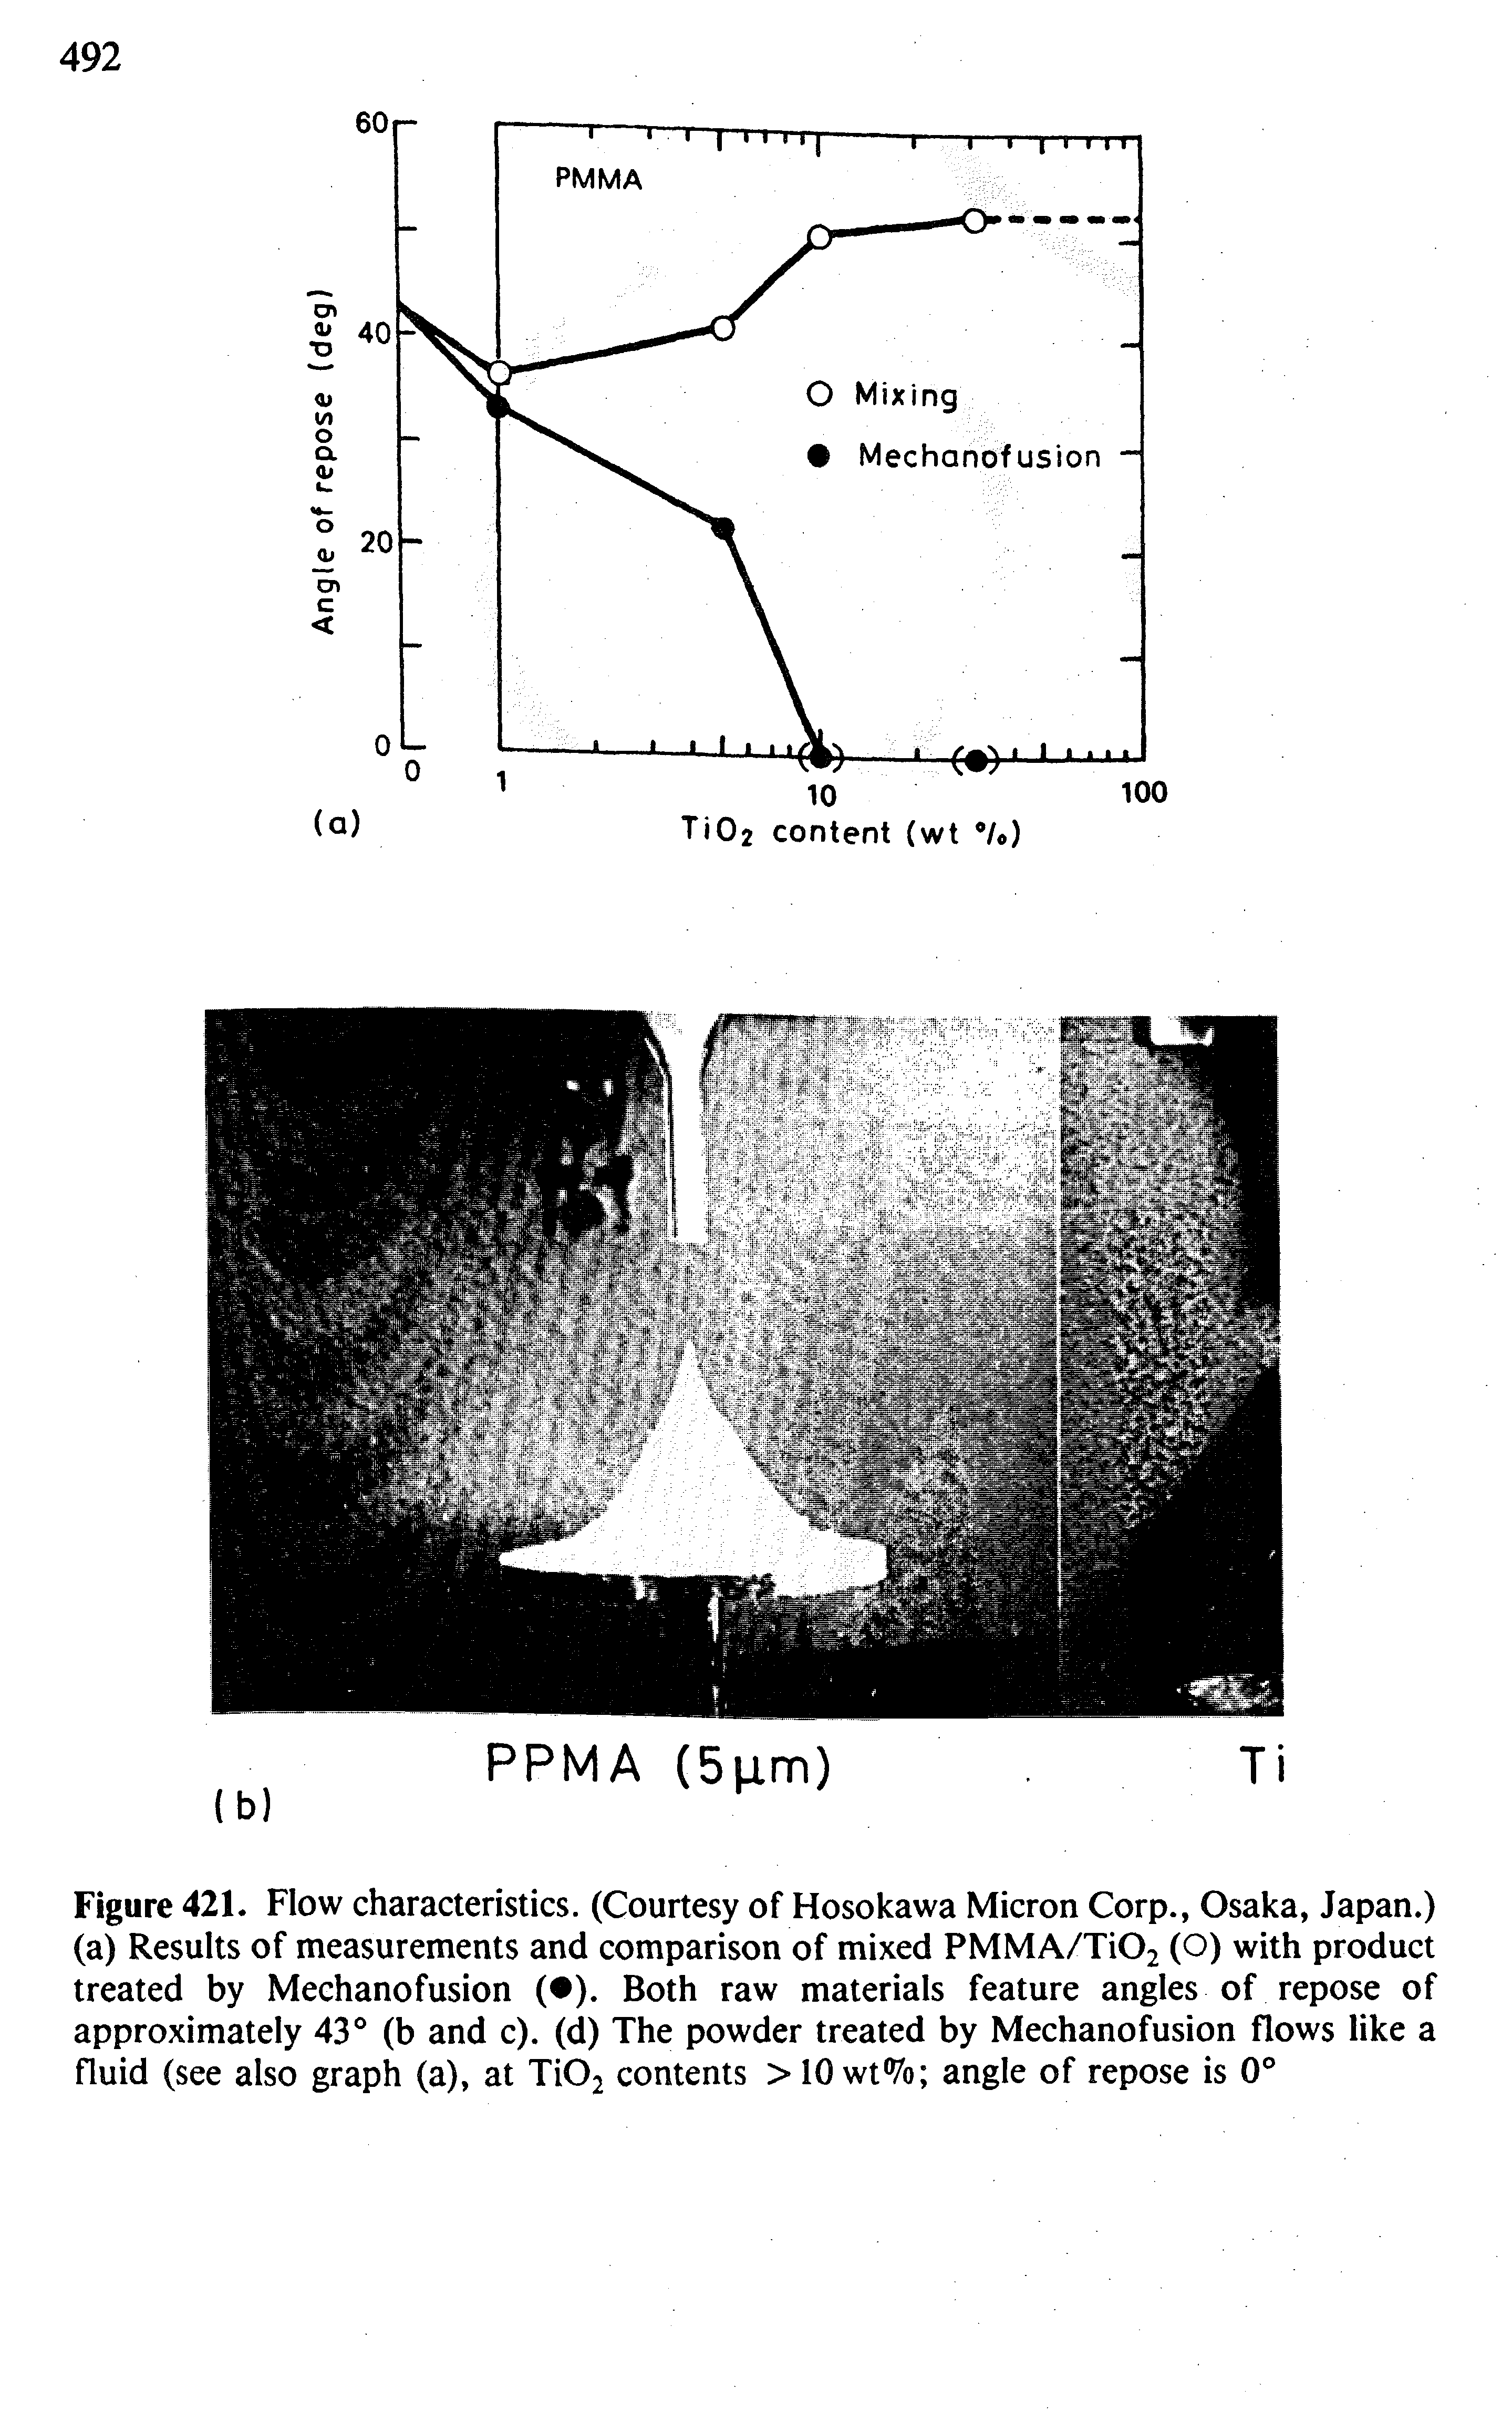 Figure 421. Flow characteristics. (Courtesy of Hosokawa Micron Corp., Osaka, Japan.) (a) Results of measurements and comparison of mixed PMMA/Ti02 (O) with product treated by Mechanofusion ( ). Both raw materials feature angles of repose of approximately 43° (b and c). (d) The powder treated by Mechanofusion flows like a fluid (see also graph (a), at Ti02 contents >10wt% angle of repose is 0°...